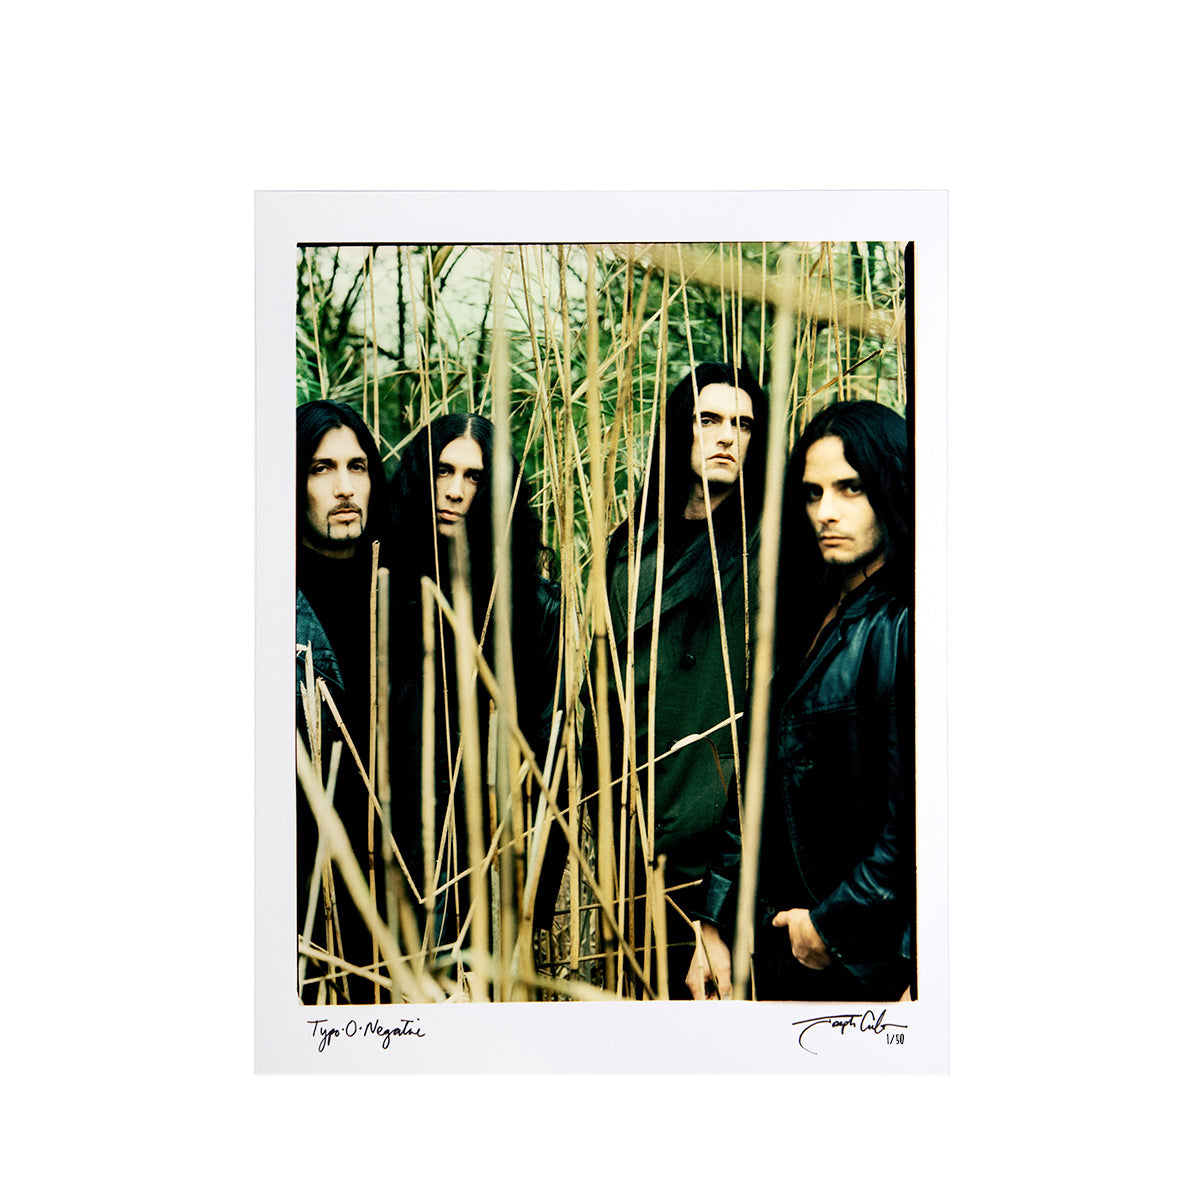 TYPE O NEGATIVE 11x14 PHOTO PRINT BY JOSEPH CULTICE - LIMITED TO 50